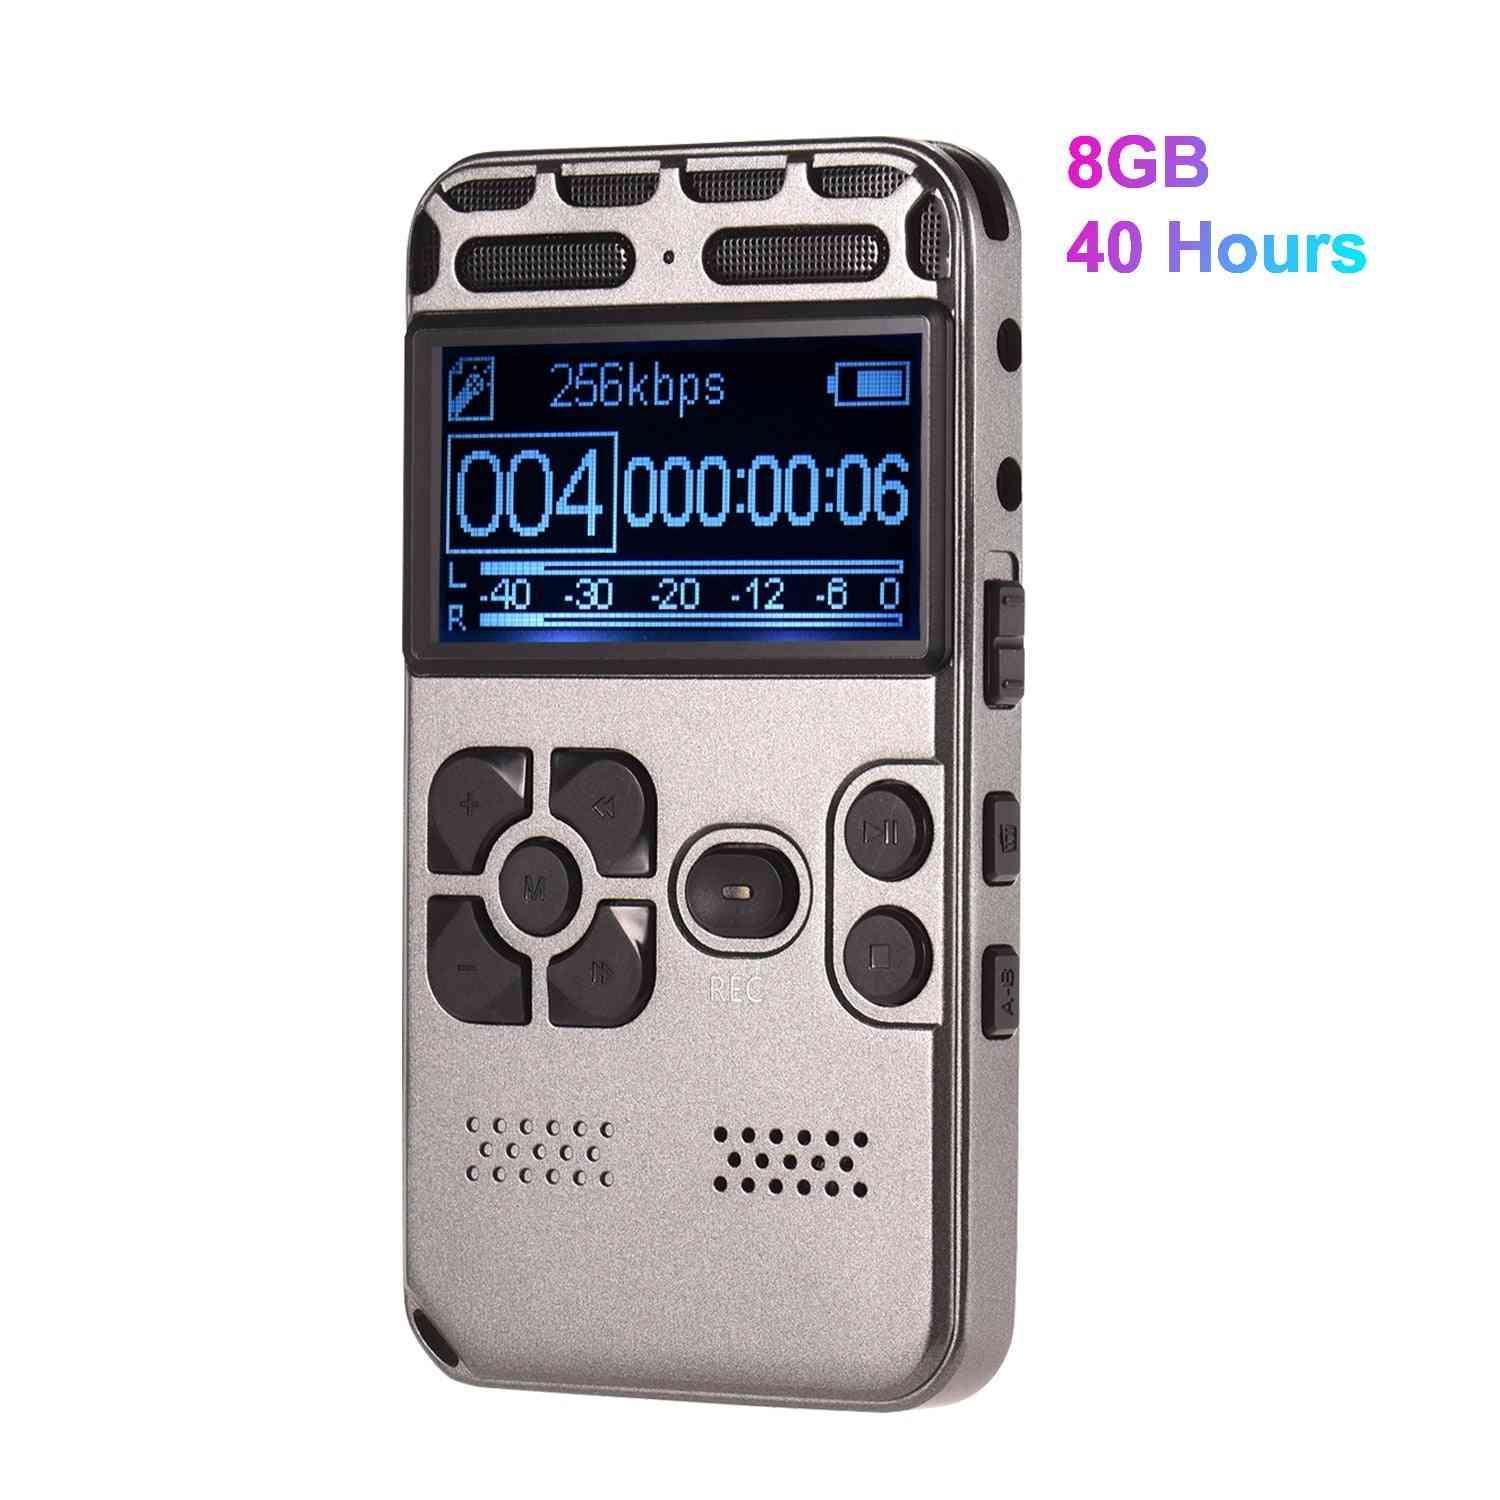 Professional High Definition Digital Sound Voice Recorder, Mp3 Player